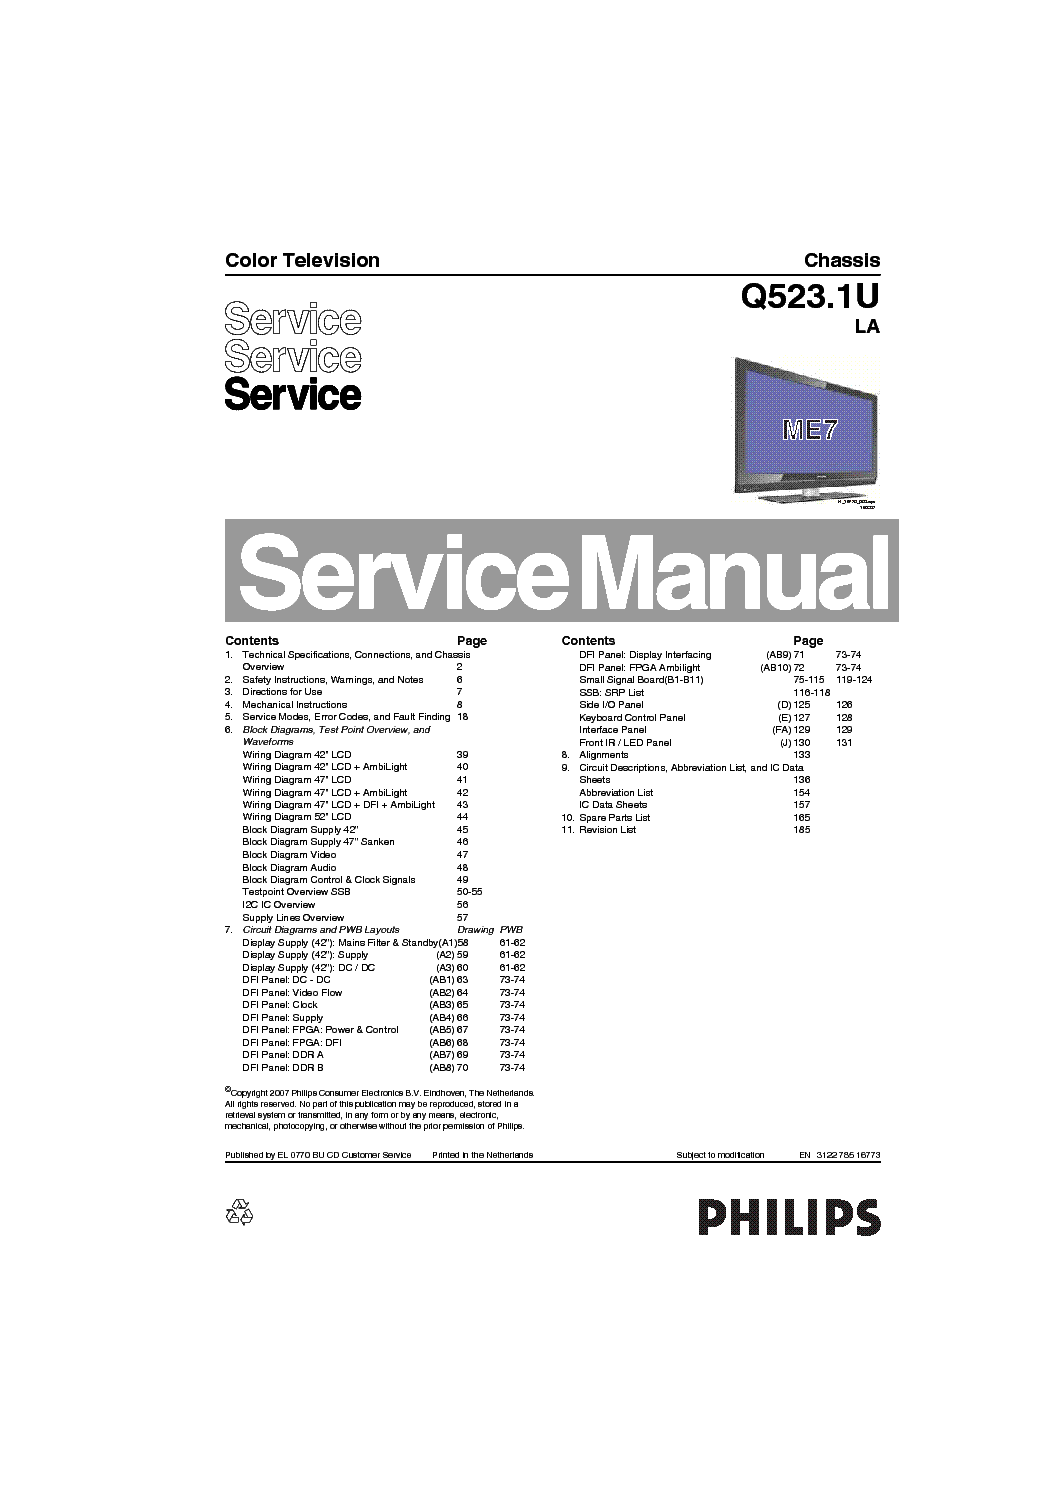 PHILIPS 42PFL7422D37 CHASSIS Q5231ULA ET LCD TV service manual (1st page)